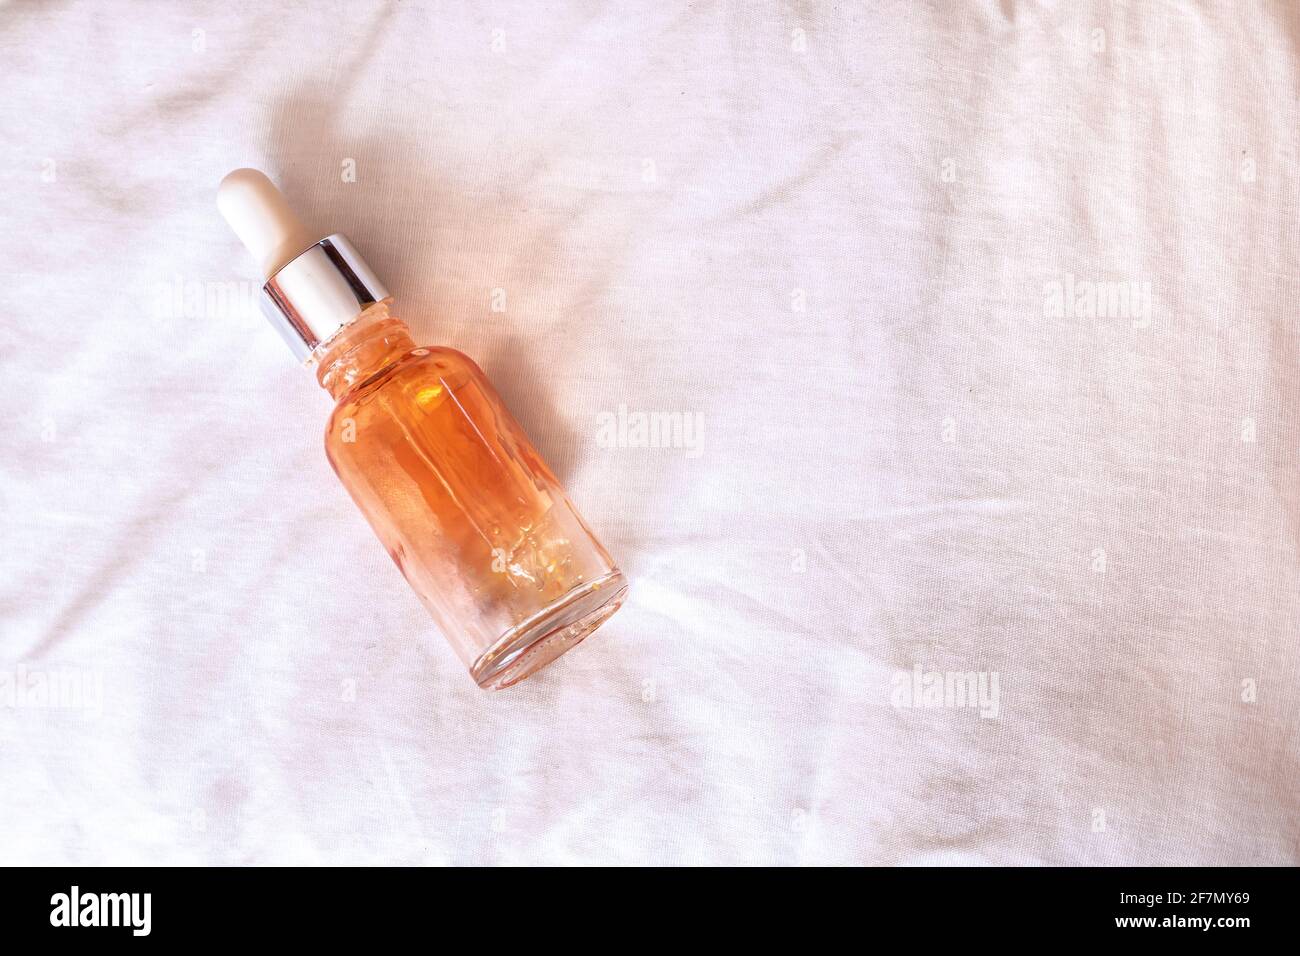 An empty serum bottle with an orange tint and white dropper head, slightly unscrewed, on a white fabric, isolated, in Canada during the wintertime. Stock Photo